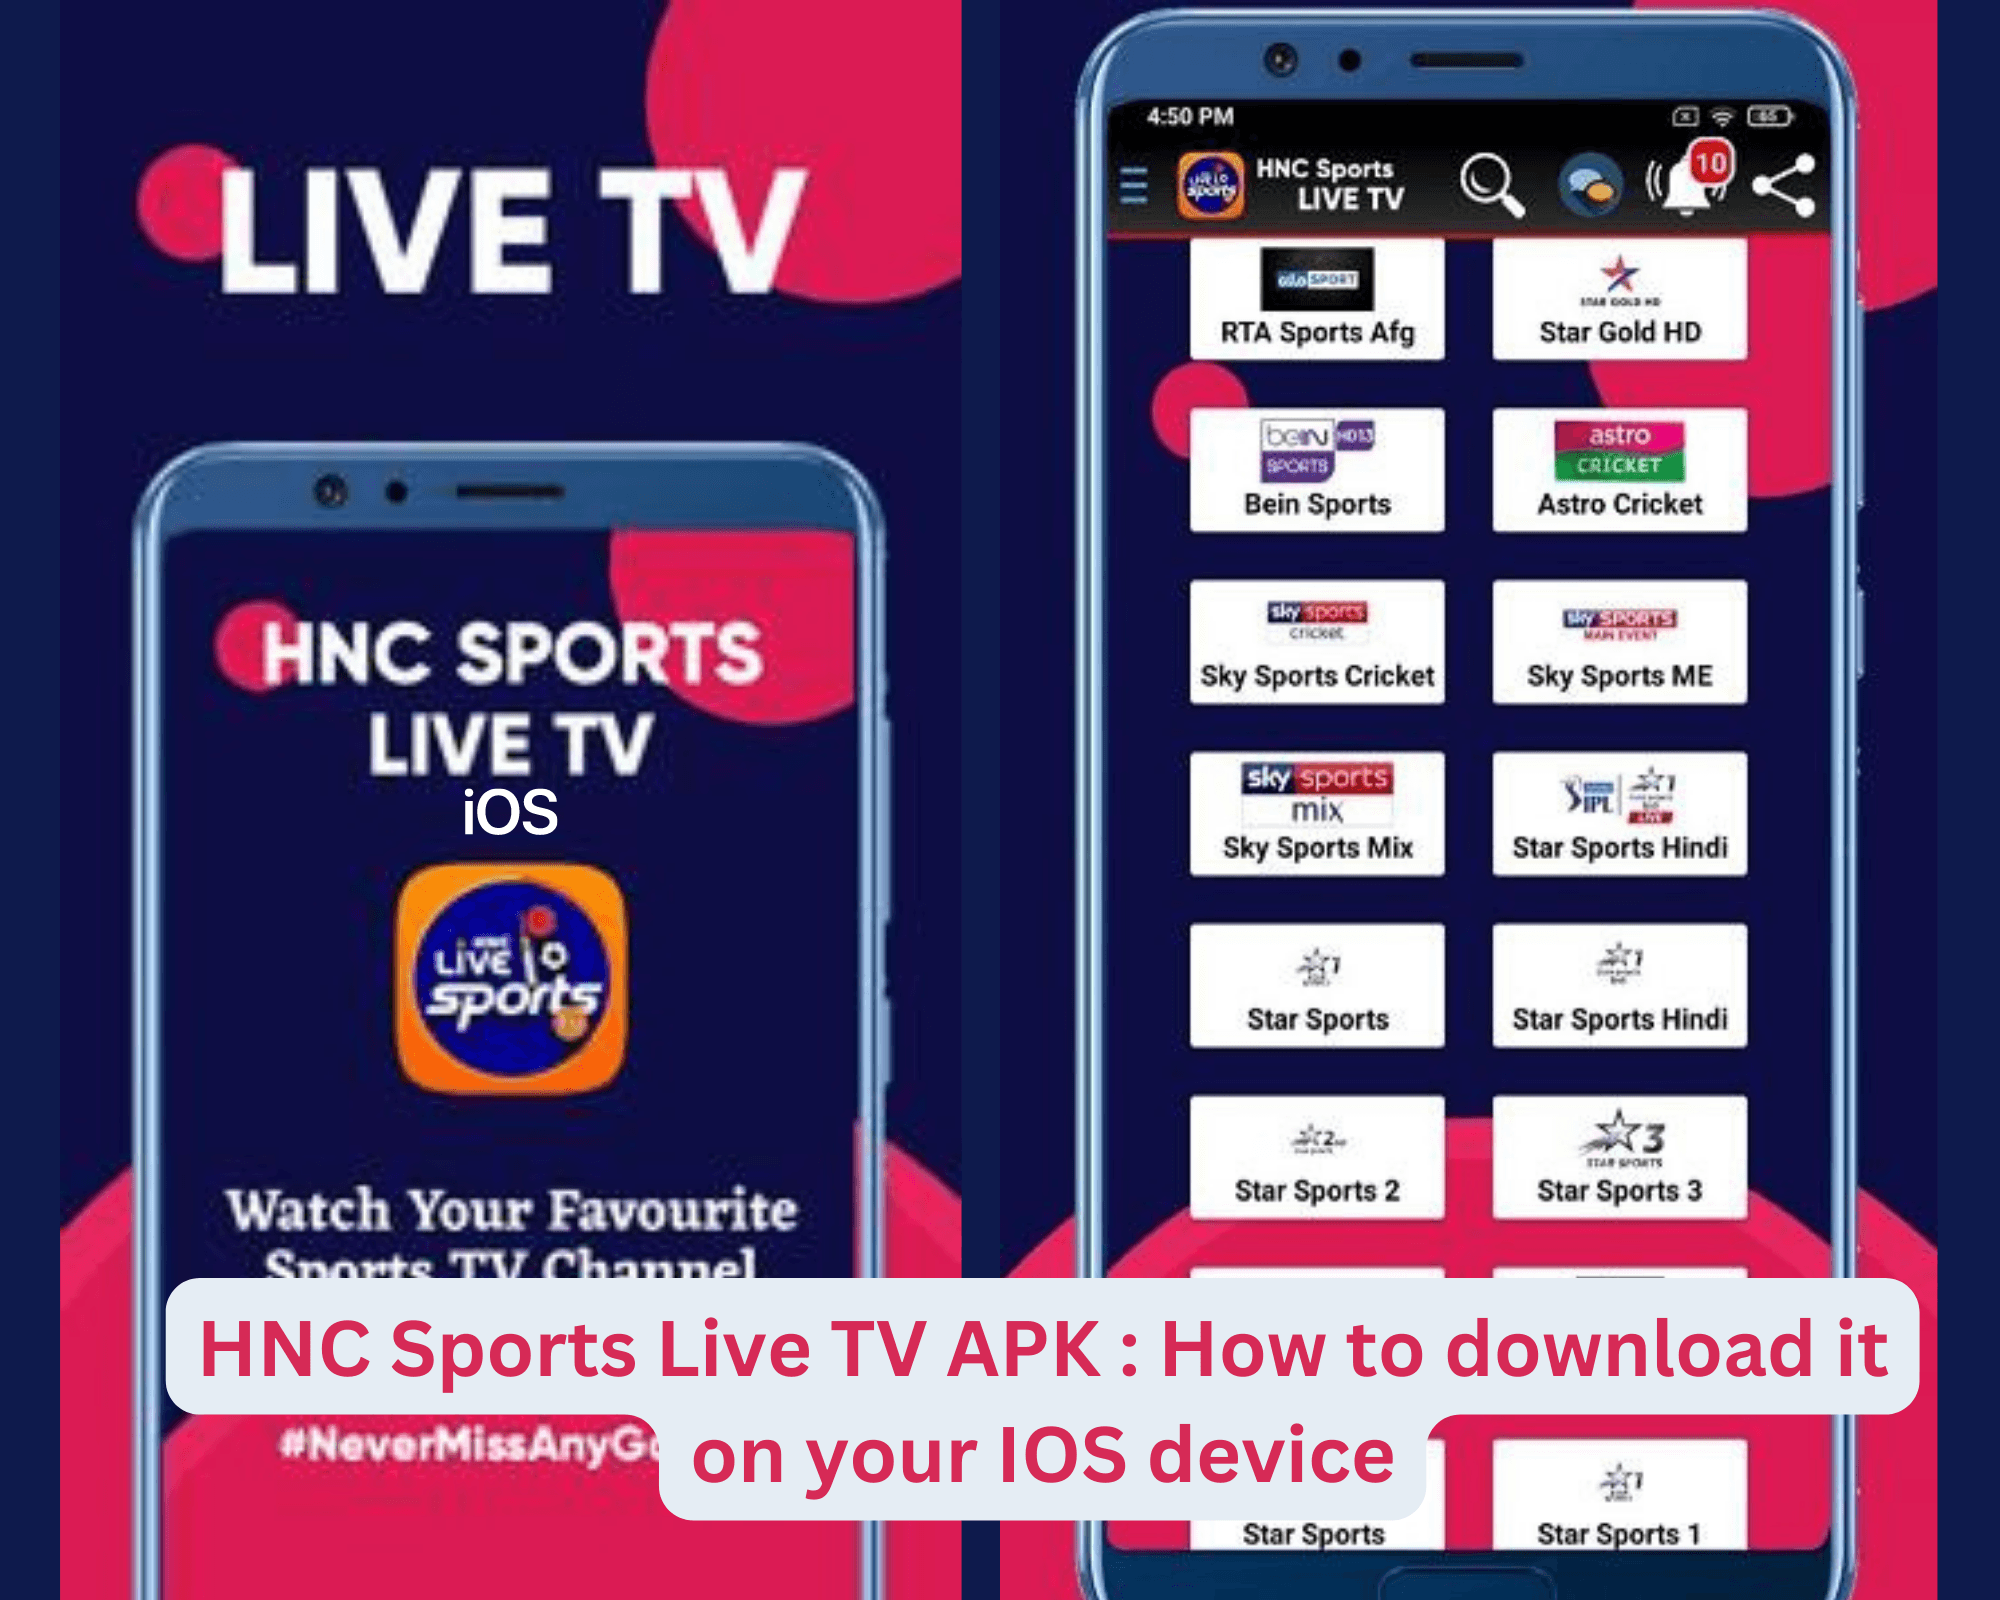 HNC Sports Live TV APK : How to download it on your IOS device